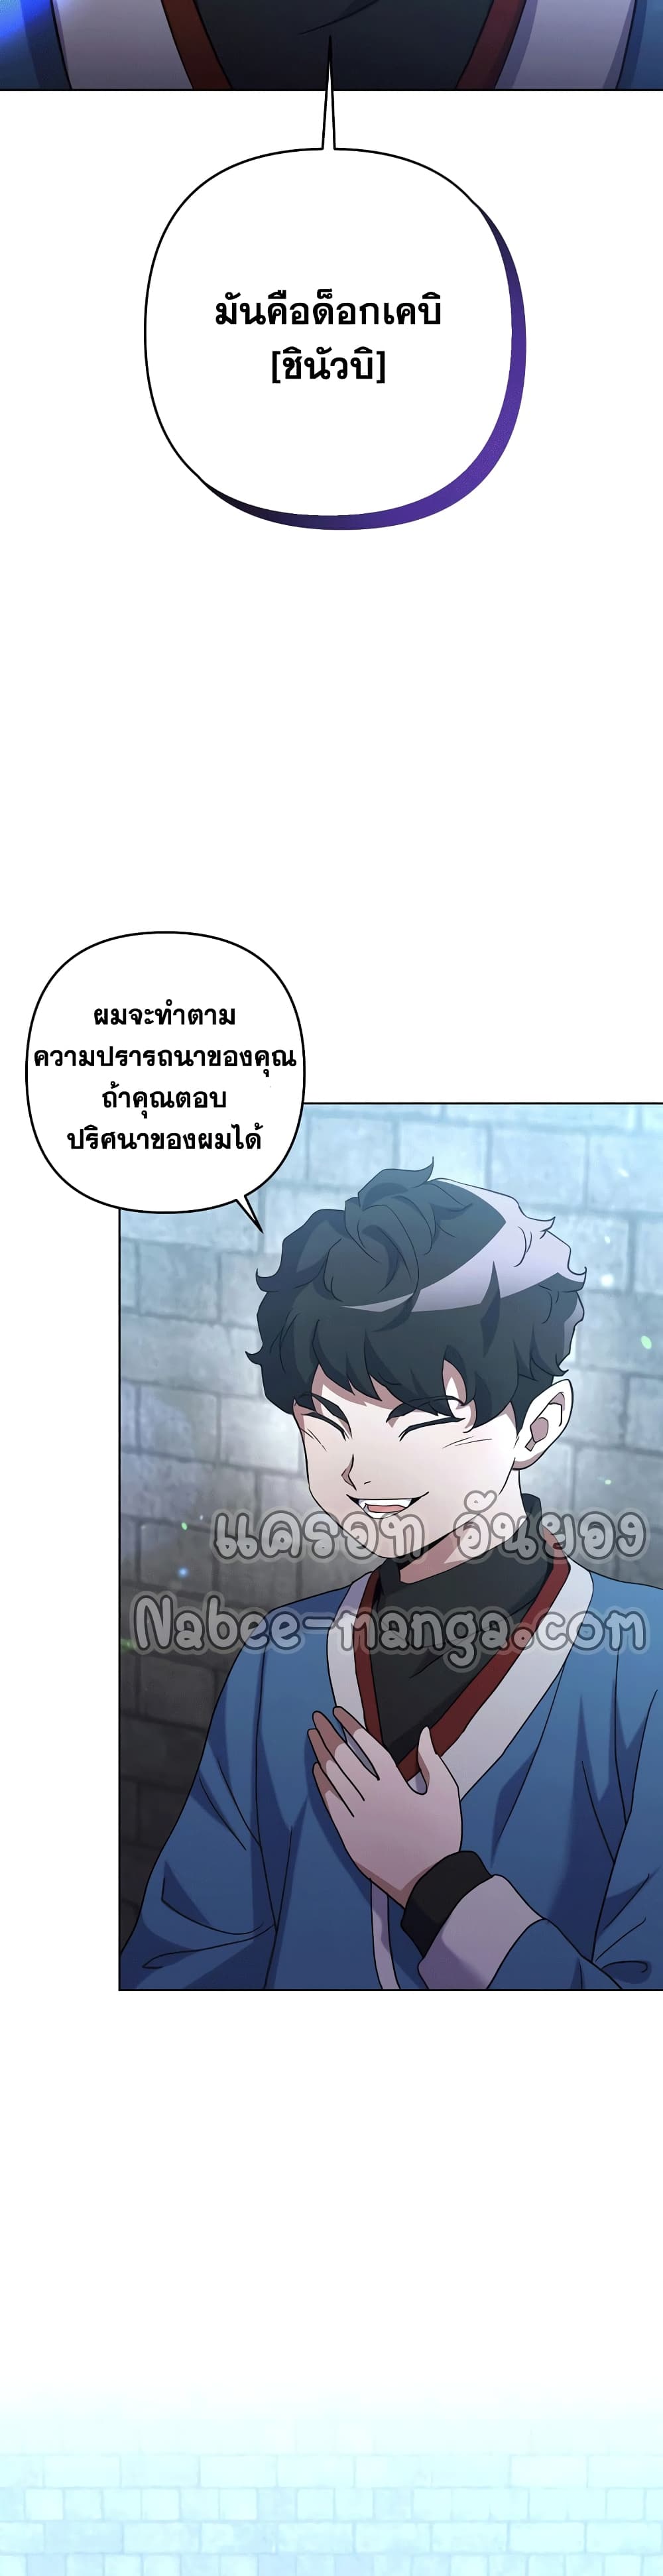 Surviving in an Action Manhwa 19 03